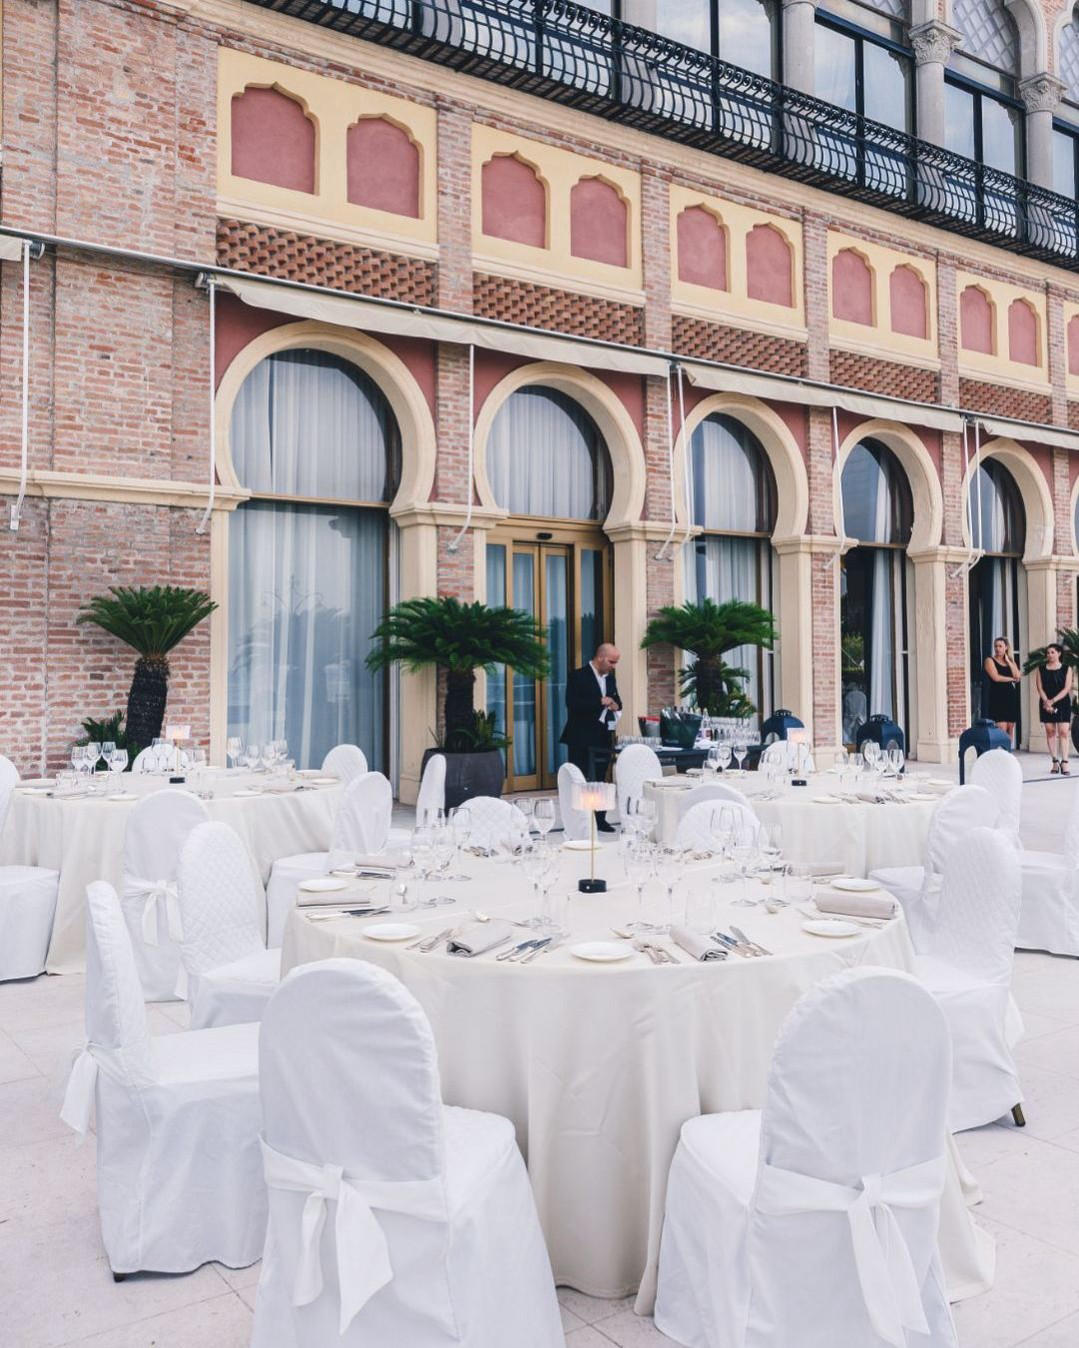 Hotel Excelsior Venice - The moments leading up to the start of a reception are the most important